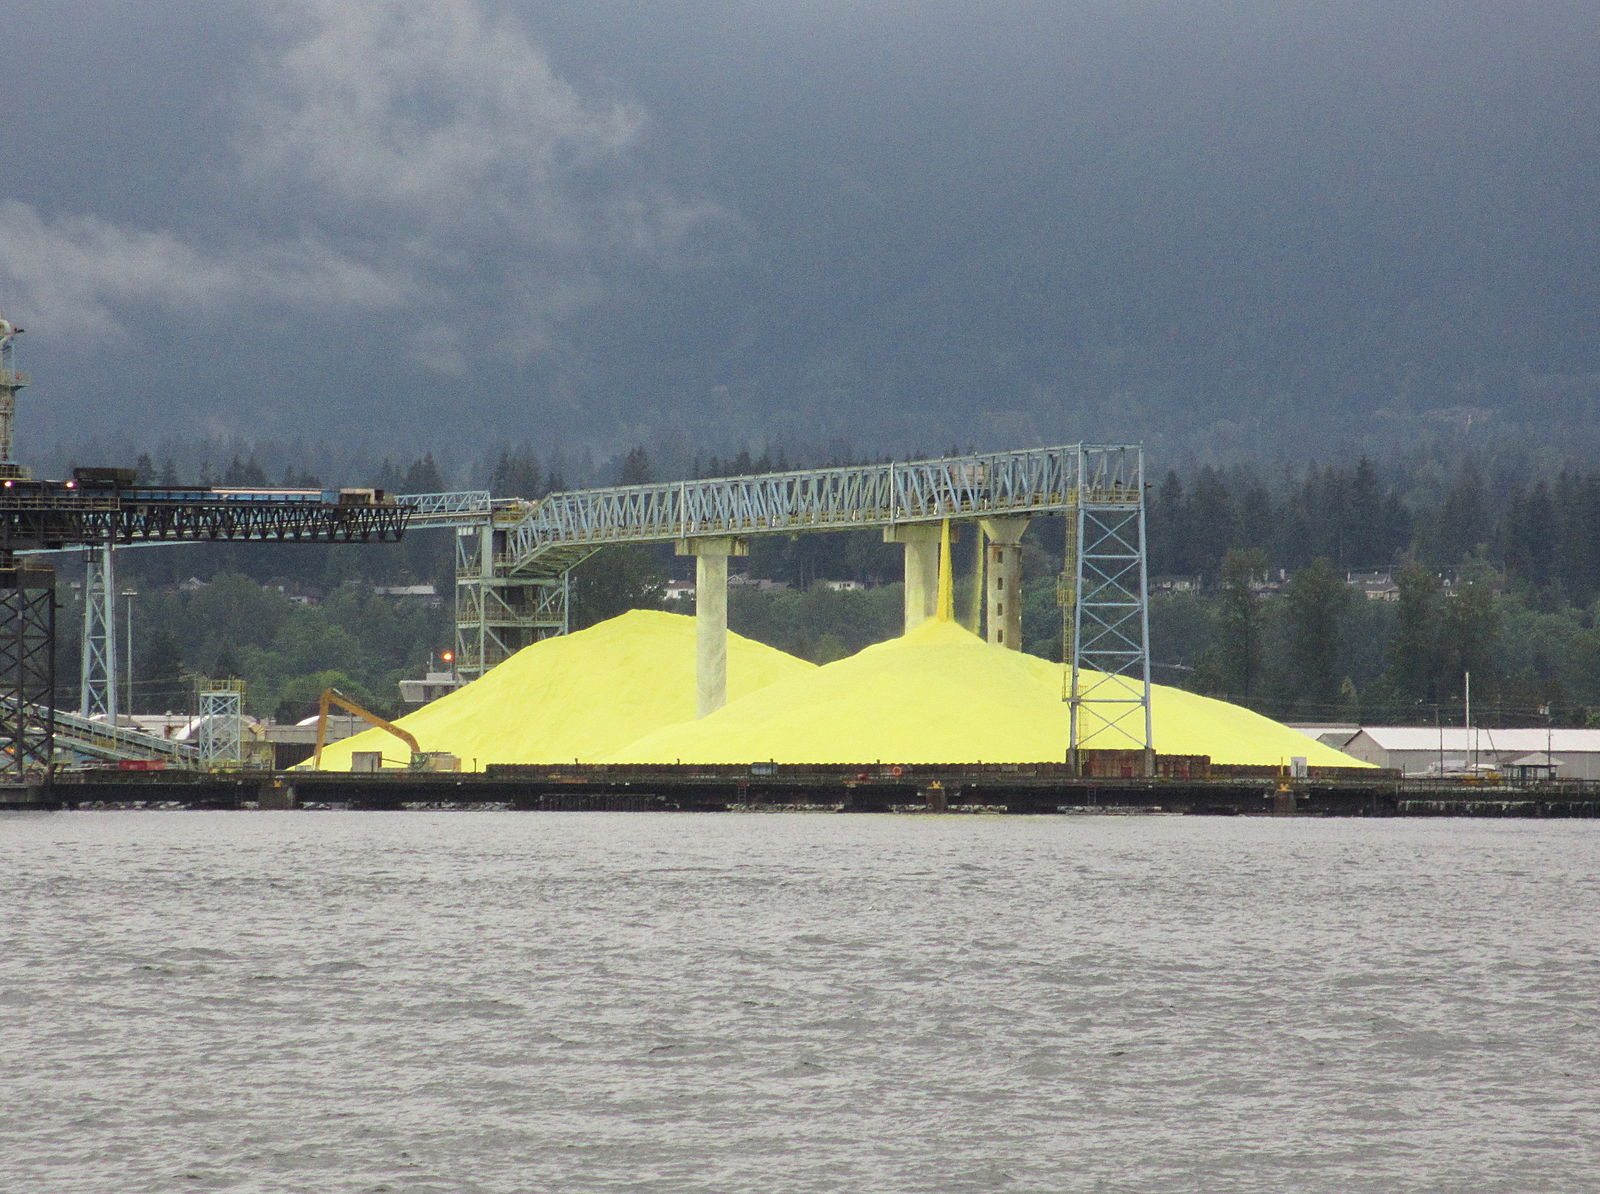 One of the major reasons for iron sulfide’s very low cost is the low cost of sulfur, which is essentially a waste product. This image shows a sulfur stockpile in Vancouver Harbor.  (Wikimedia Commons)